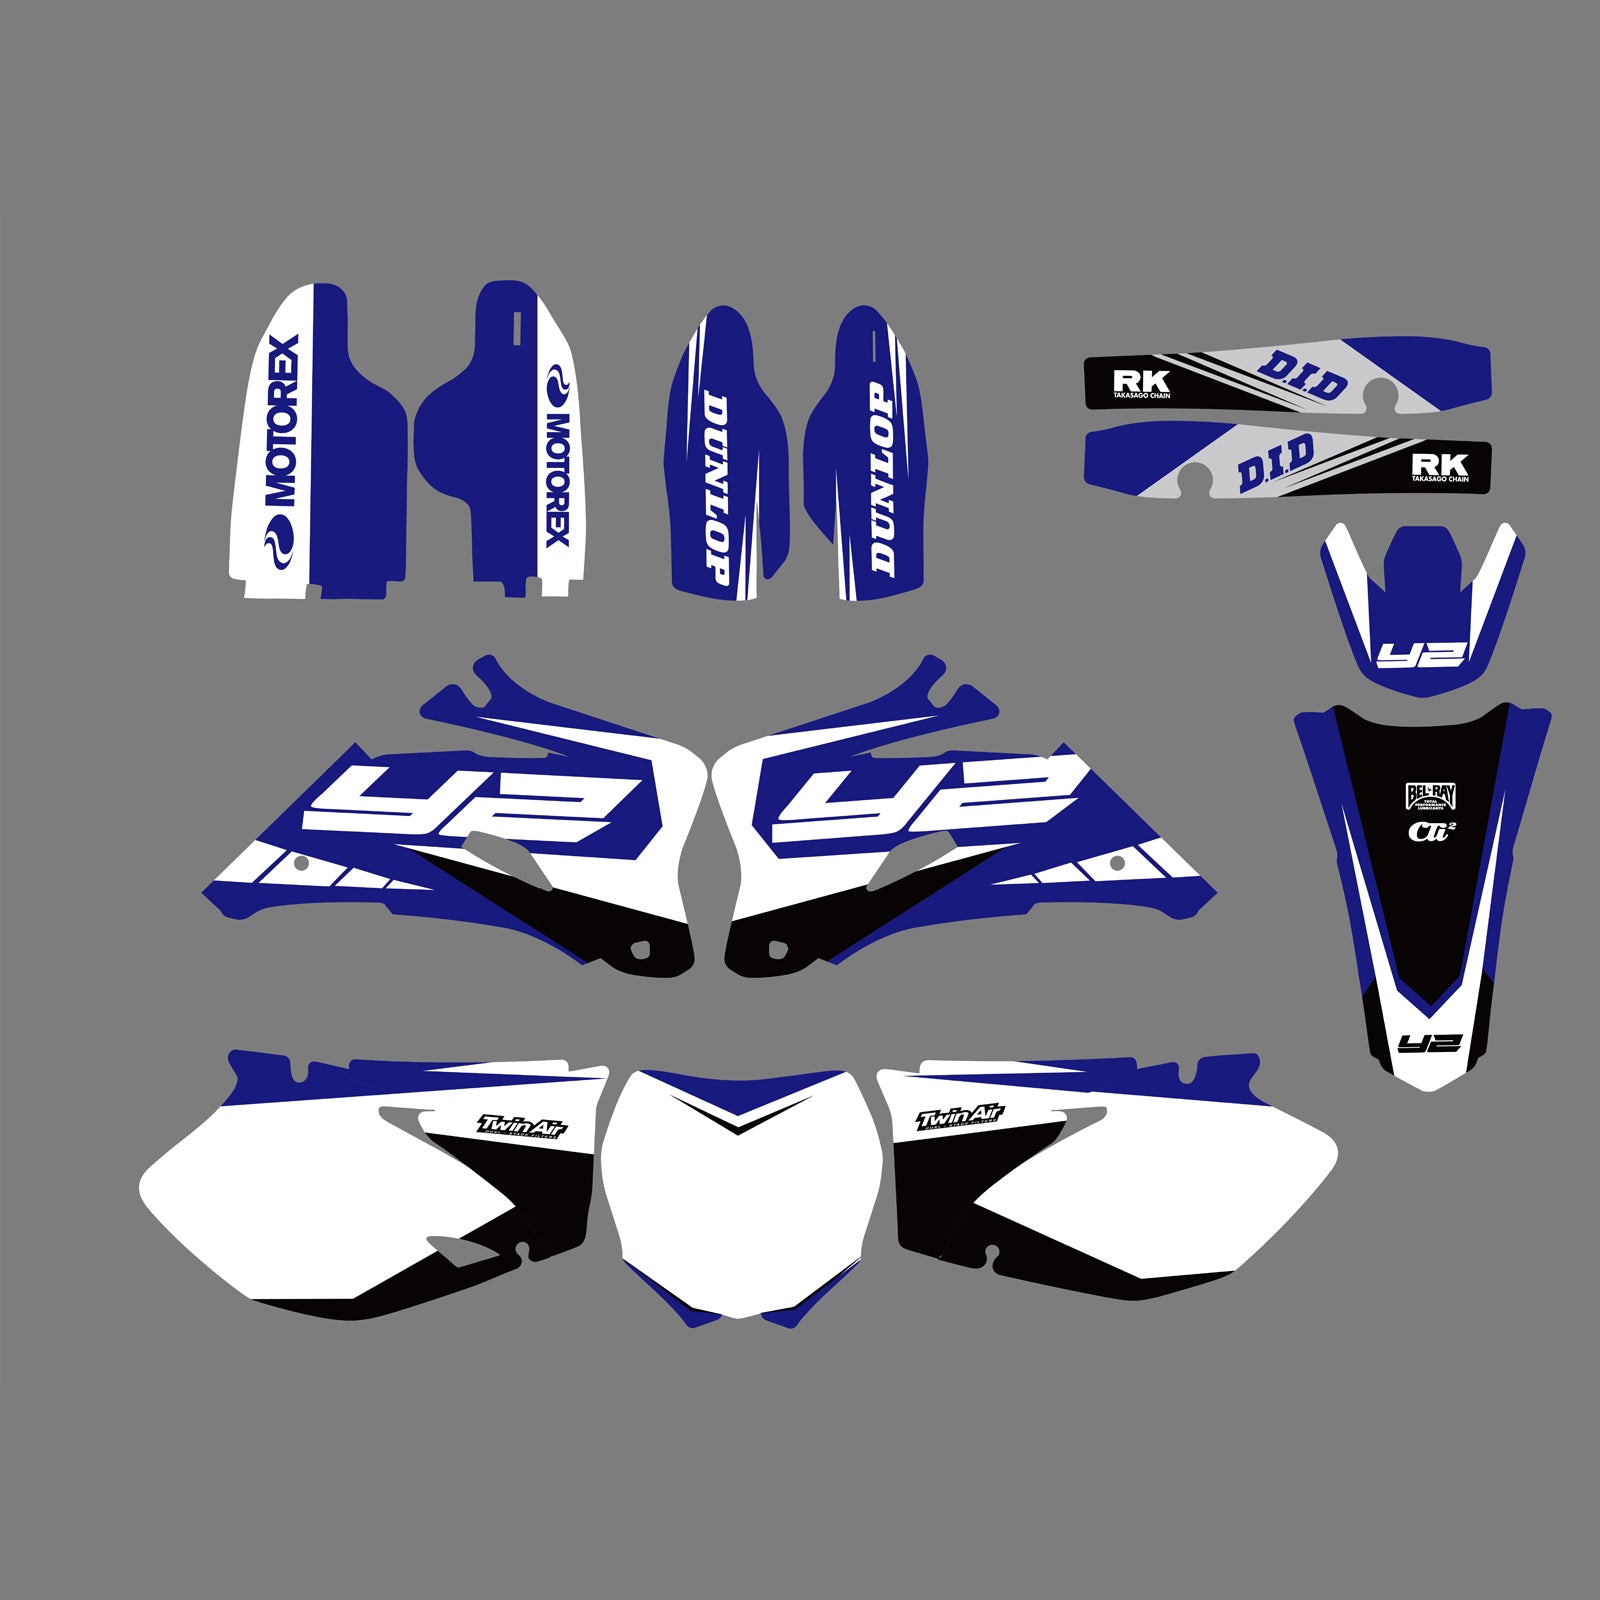 Team Graphics & Backgrounds Decals Stickers Kit for YAMAHA YZ250F YZ450F